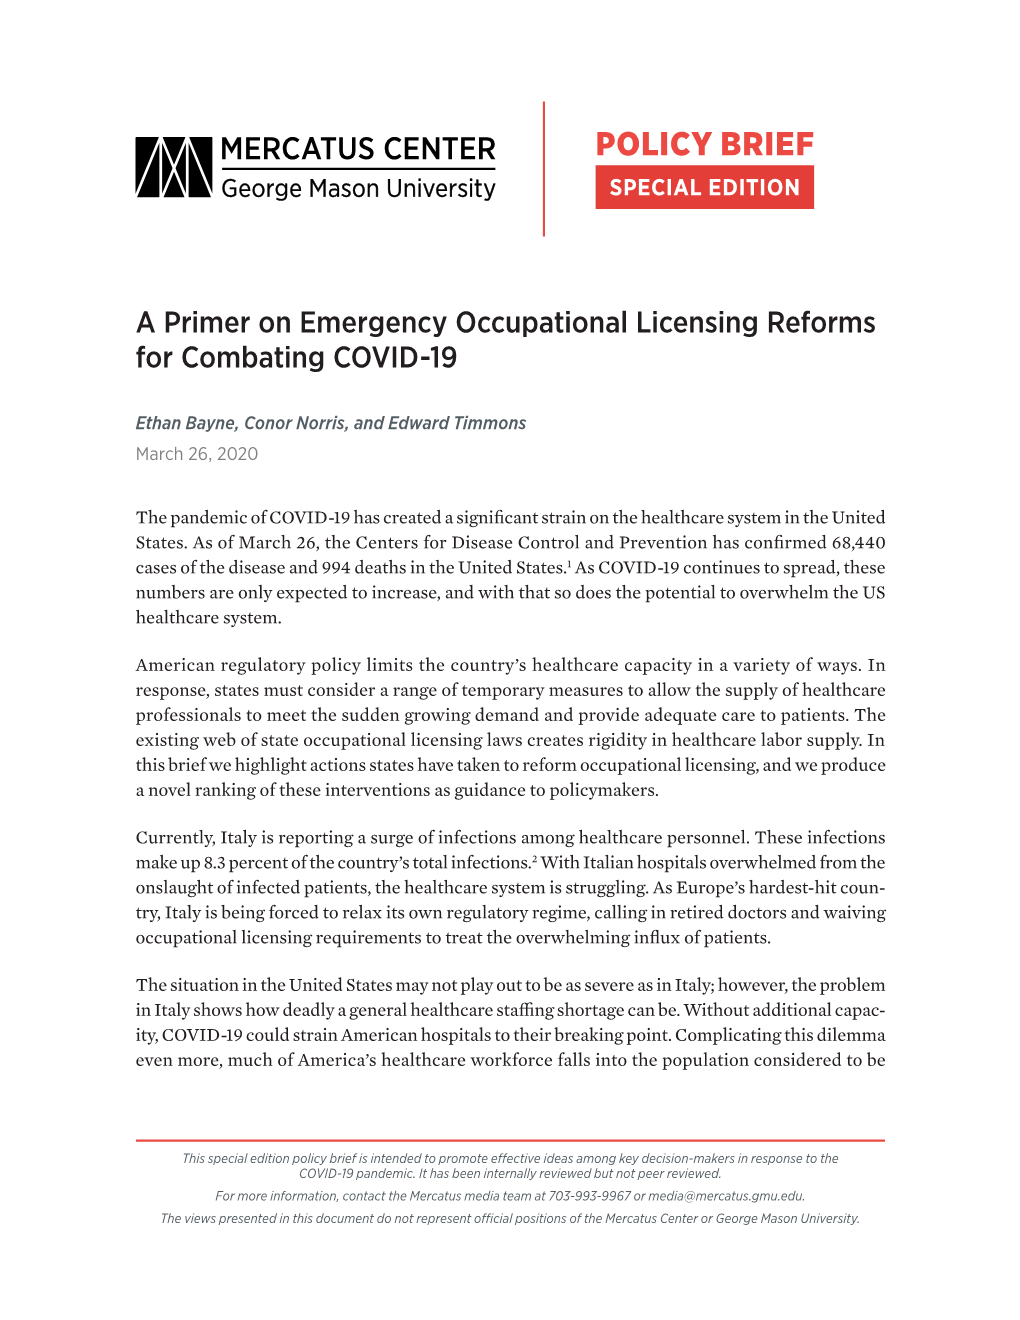 A Primer on Emergency Occupational Licensing Reforms for Combating COVID-19